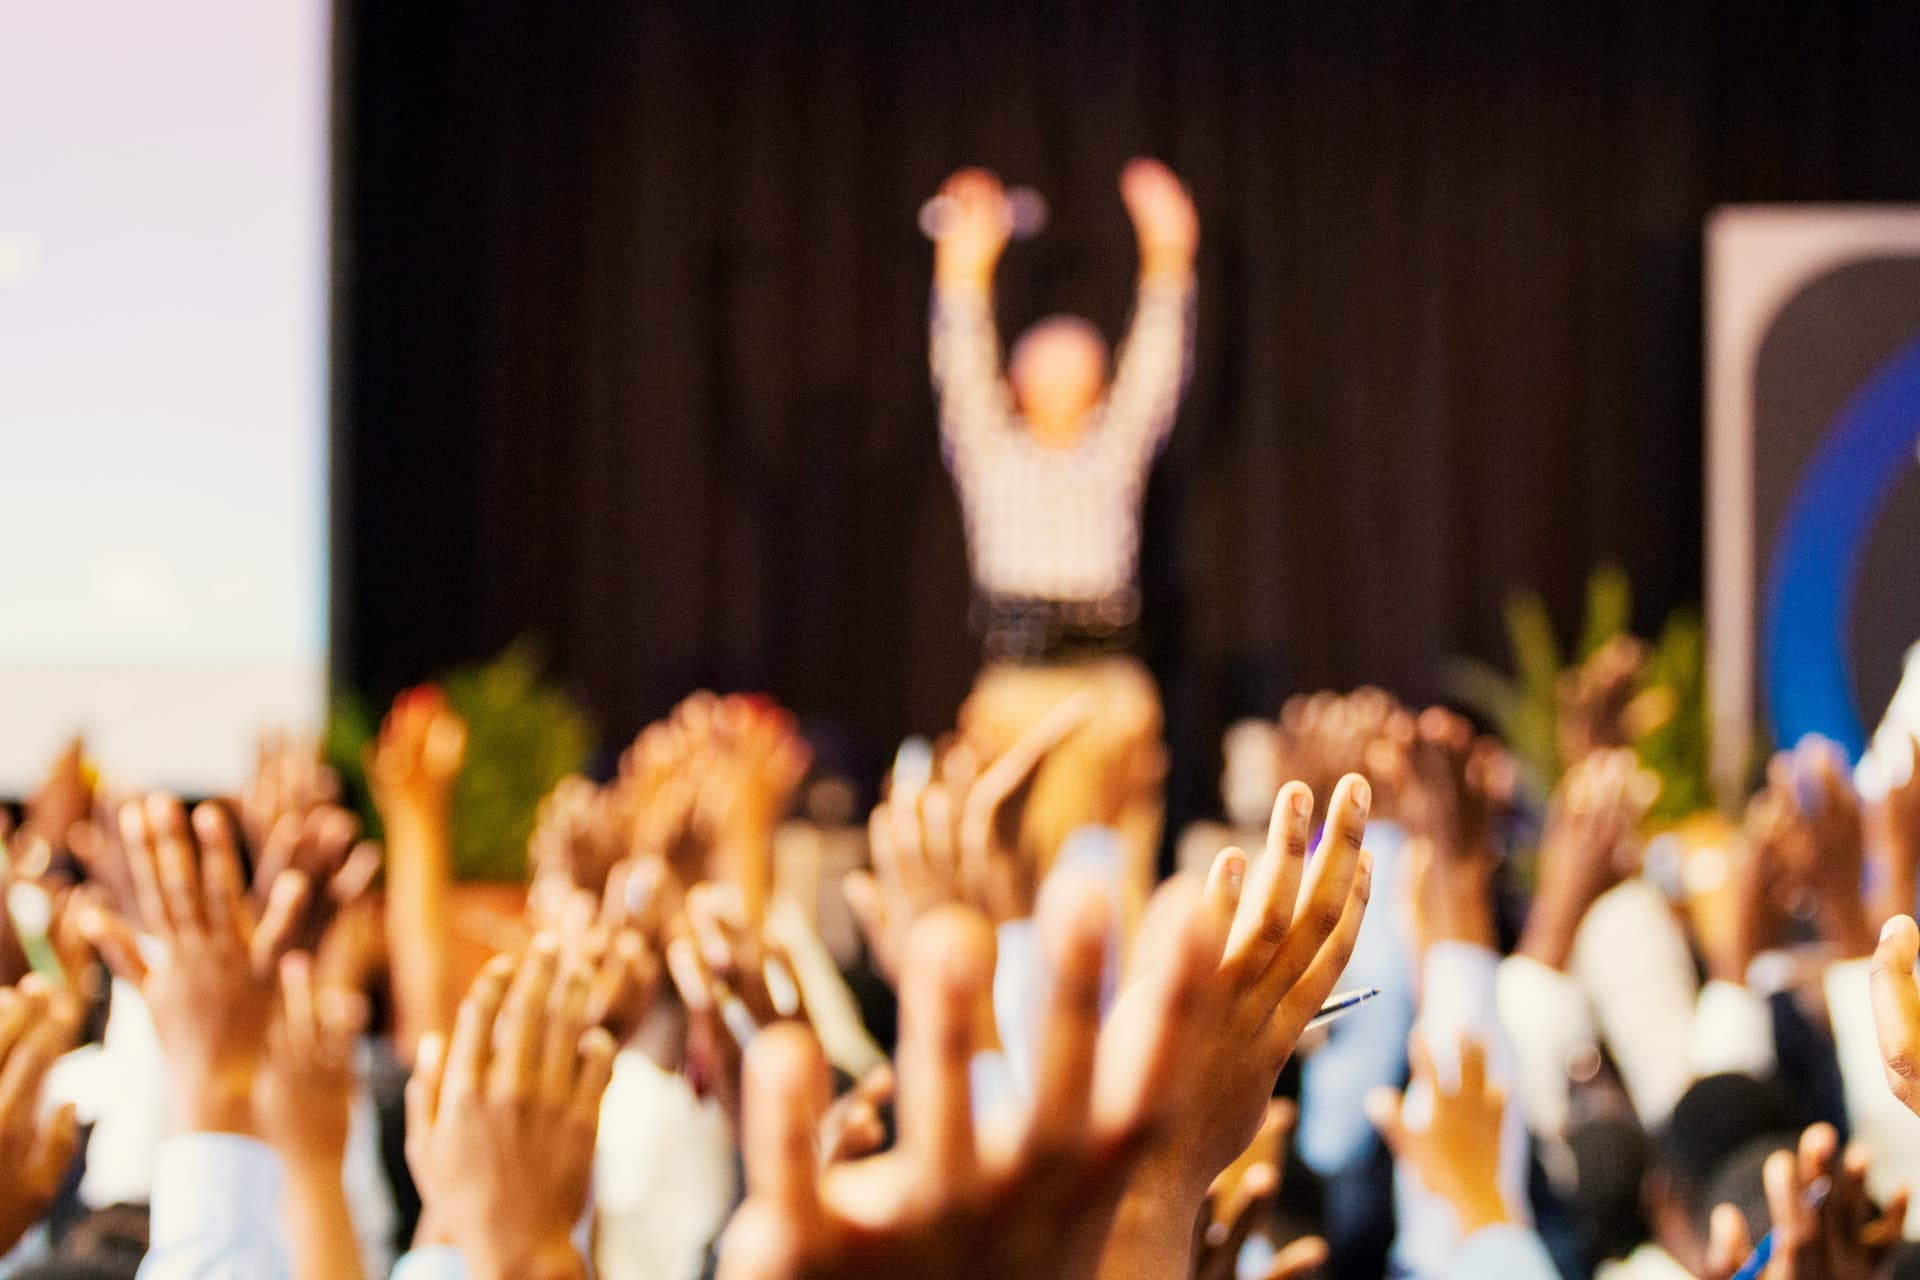 Image Title: conference, expo, trade show: https://unsplash.com/photos/0RDBOAdnbWM#:~:text=Photo%20by%20Jaime%20Lopes%20on%20Unsplash Image Description: A picture of an event, conference, people at an expo Alt Text: conference, expo